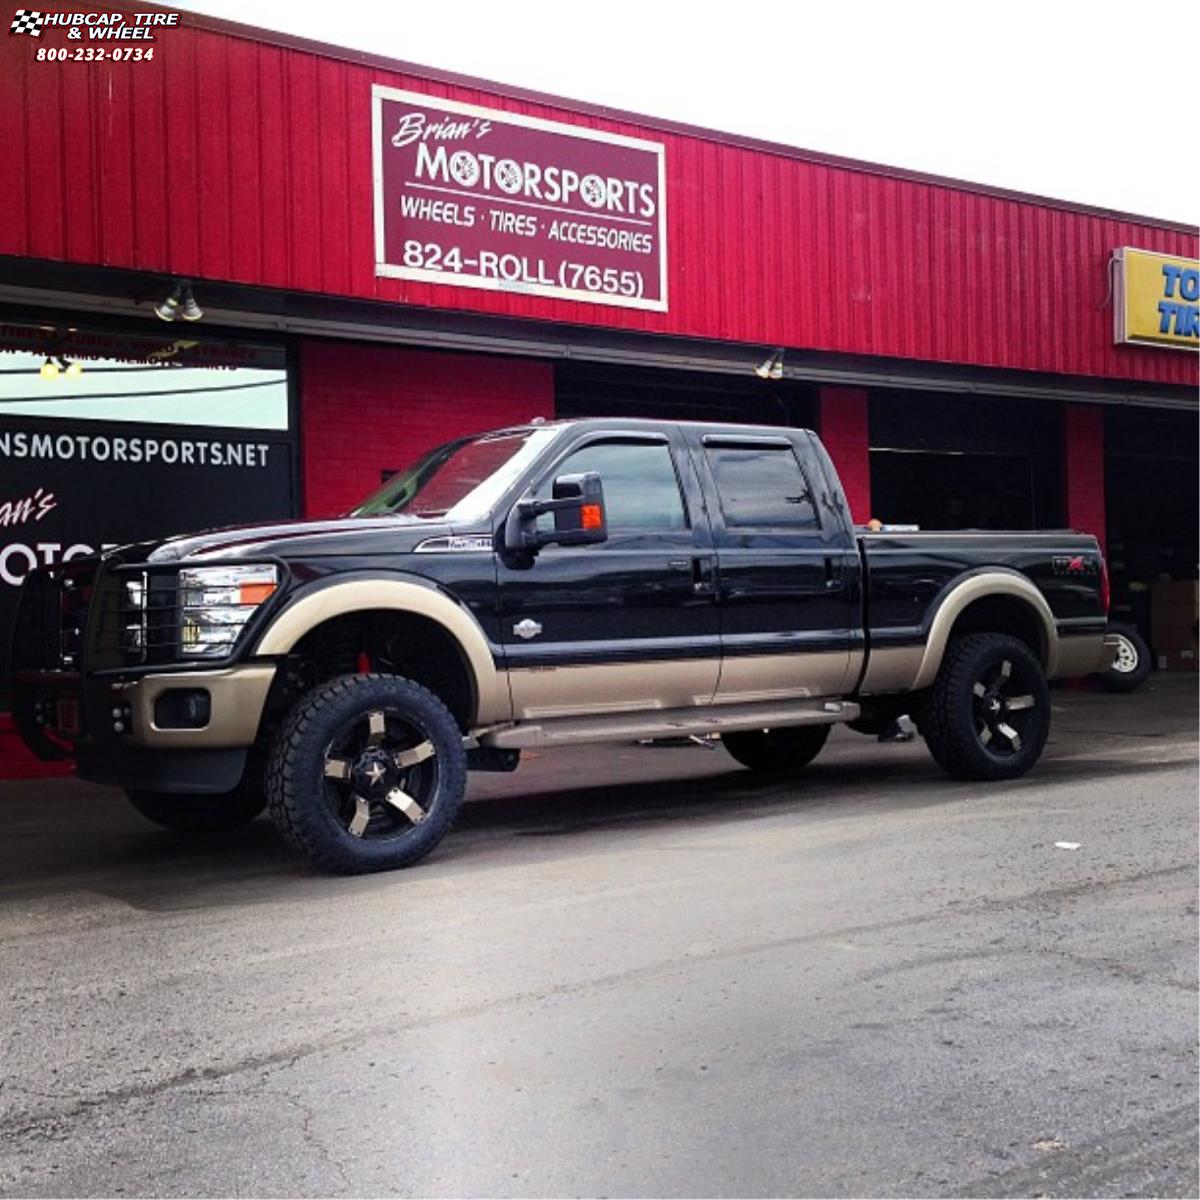 vehicle gallery/ford f 250 xd series xd811 rockstar 2  Satin Black Gold Inserts wheels and rims